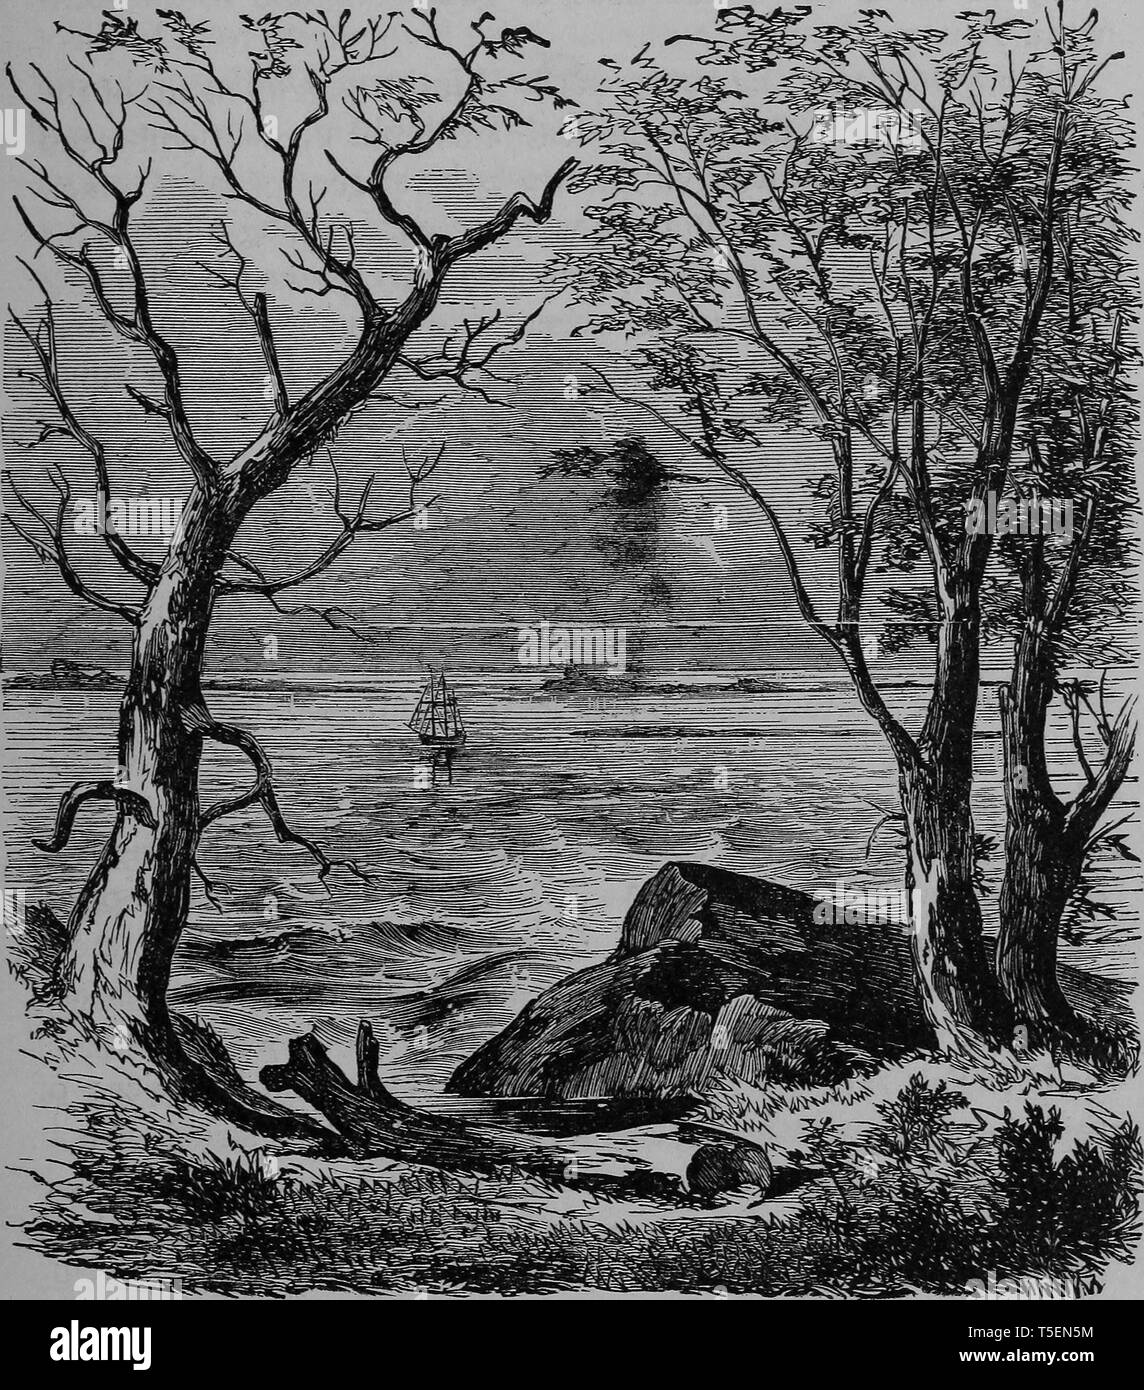 Engraving of the Plymouth Rock in Plymouth, Massachusetts, from the book 'The political history of the United States' by James Penny Boyd, 1888. Courtesy Internet Archive. () Stock Photo